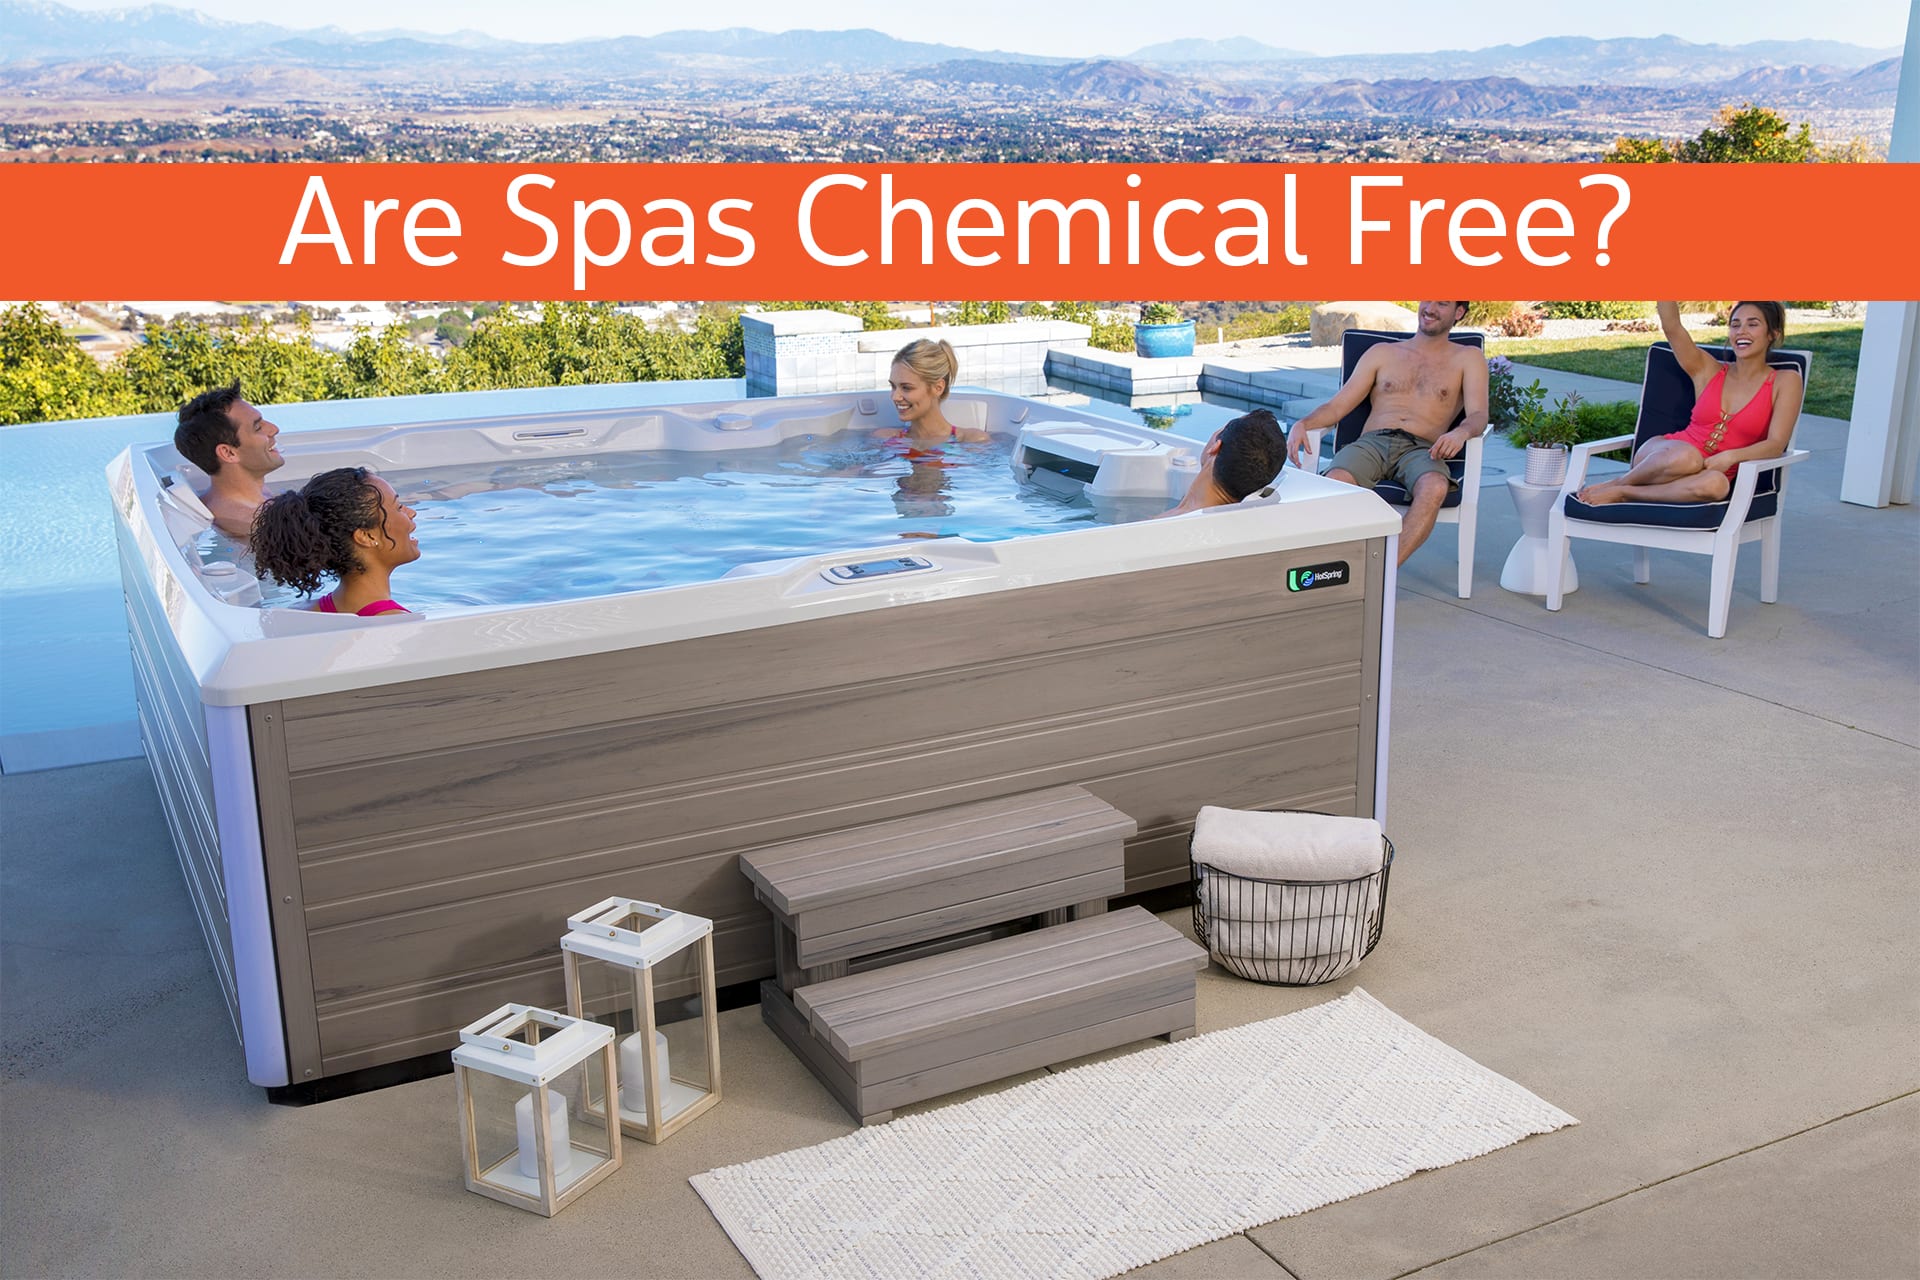 Are Spas and Hot Tubs Chemical Free?